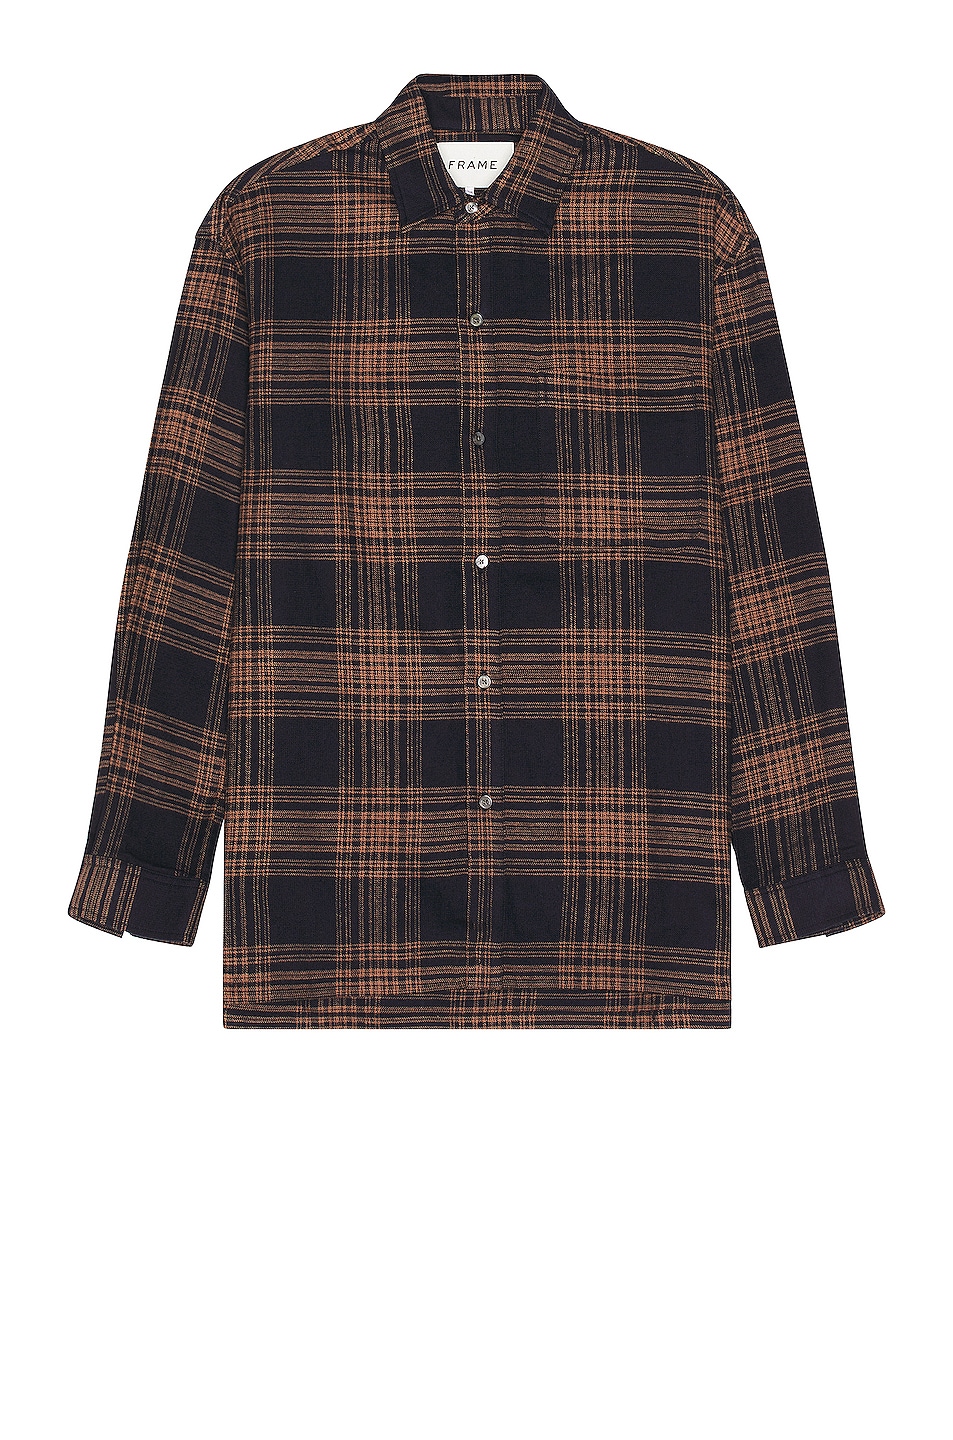 Image 1 of FRAME Relaxed Long Sleeve Shirt in Tan Plaid